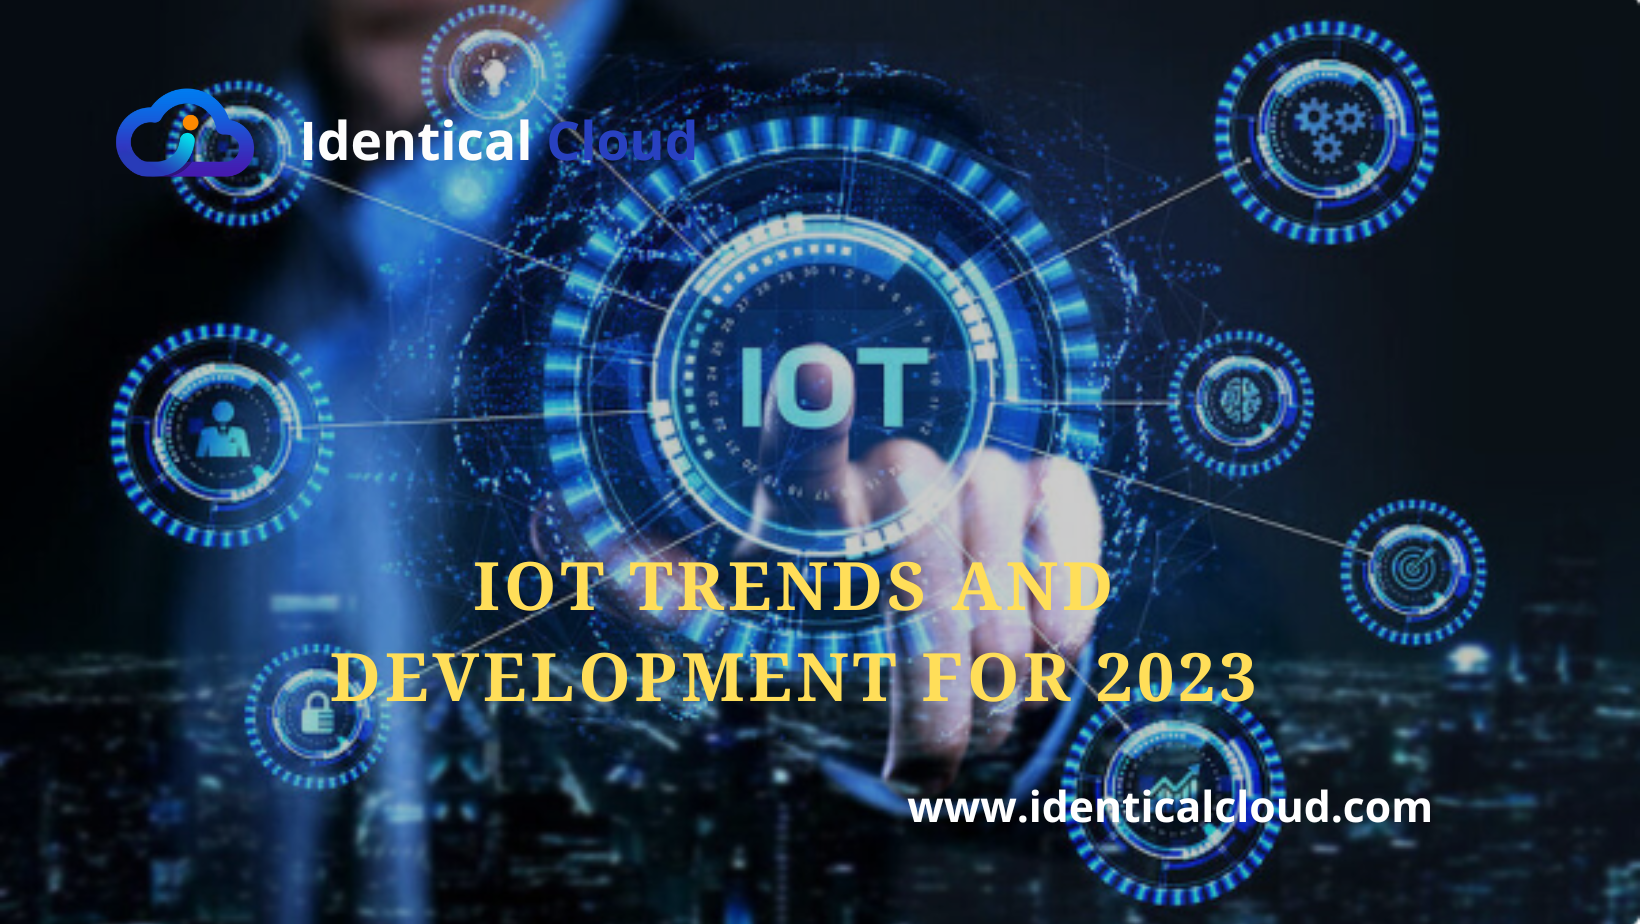 IoT Trends and Development for 2023 - identicalcloud.com